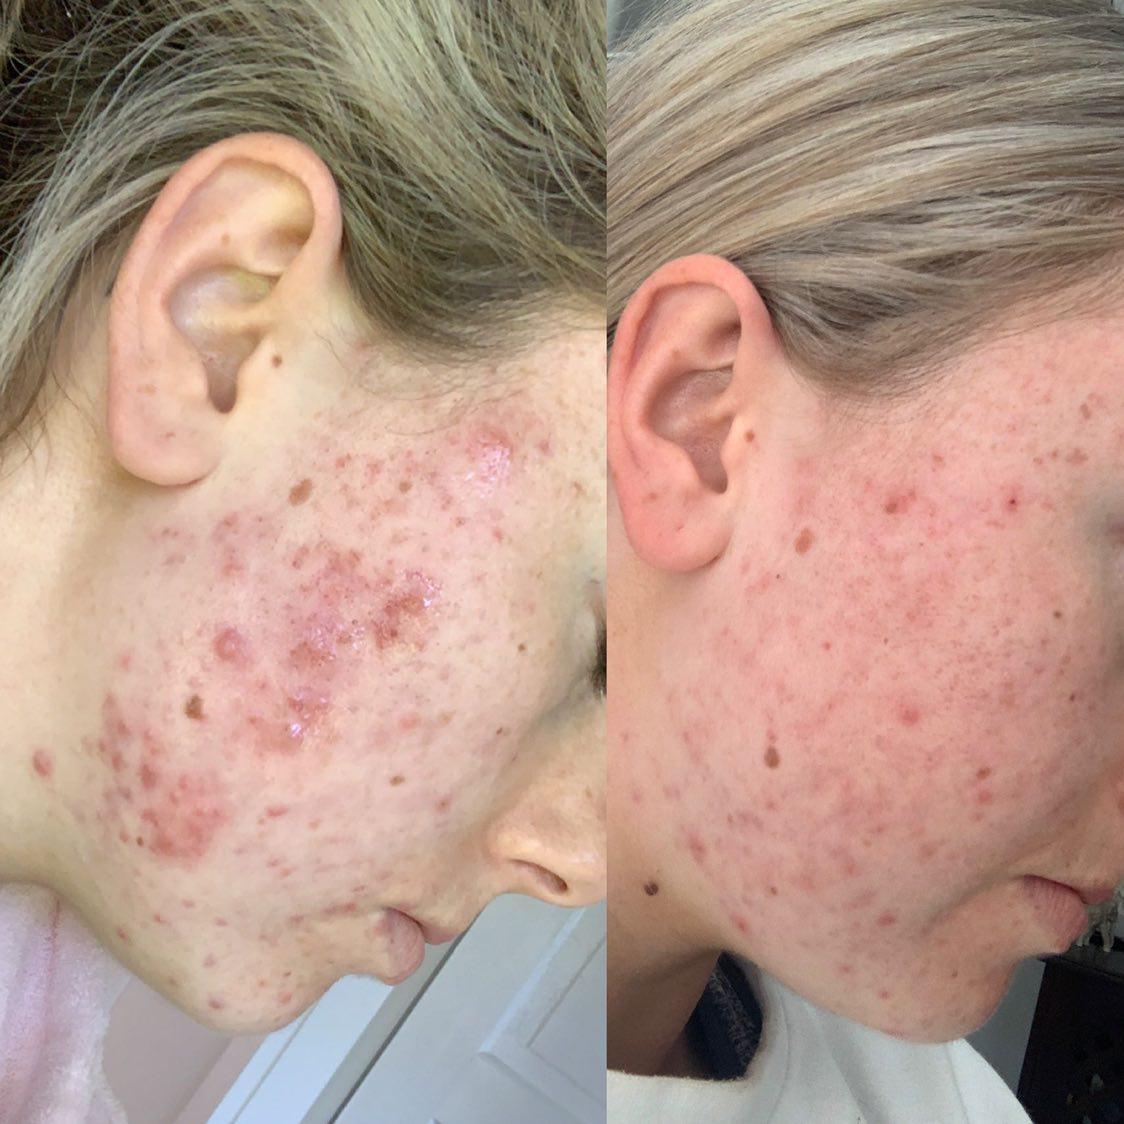 Acne-prone skin 2-month results